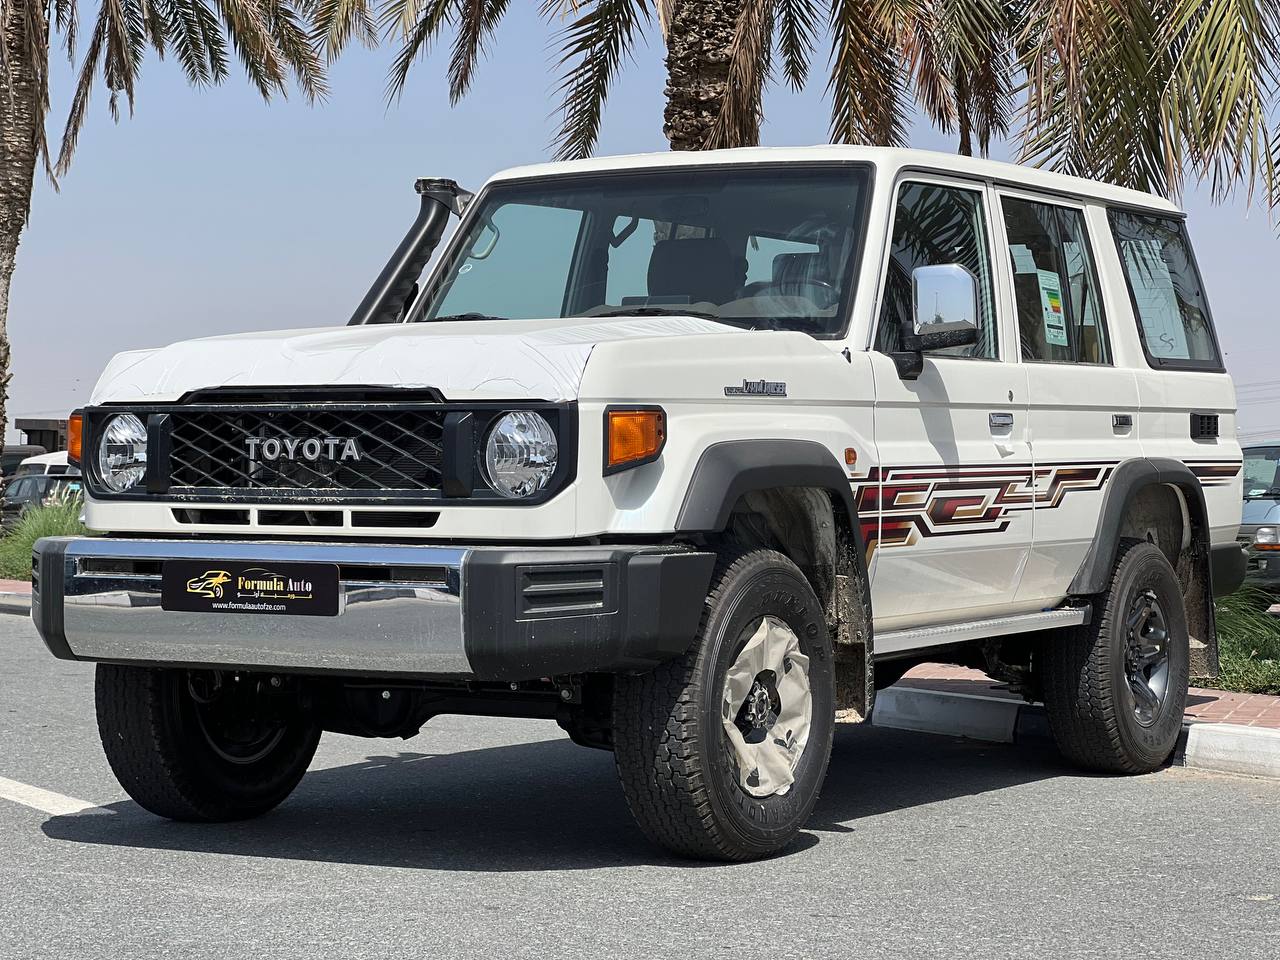 Discover the Best Toyota Used Cars in Dubai With Formula Auto